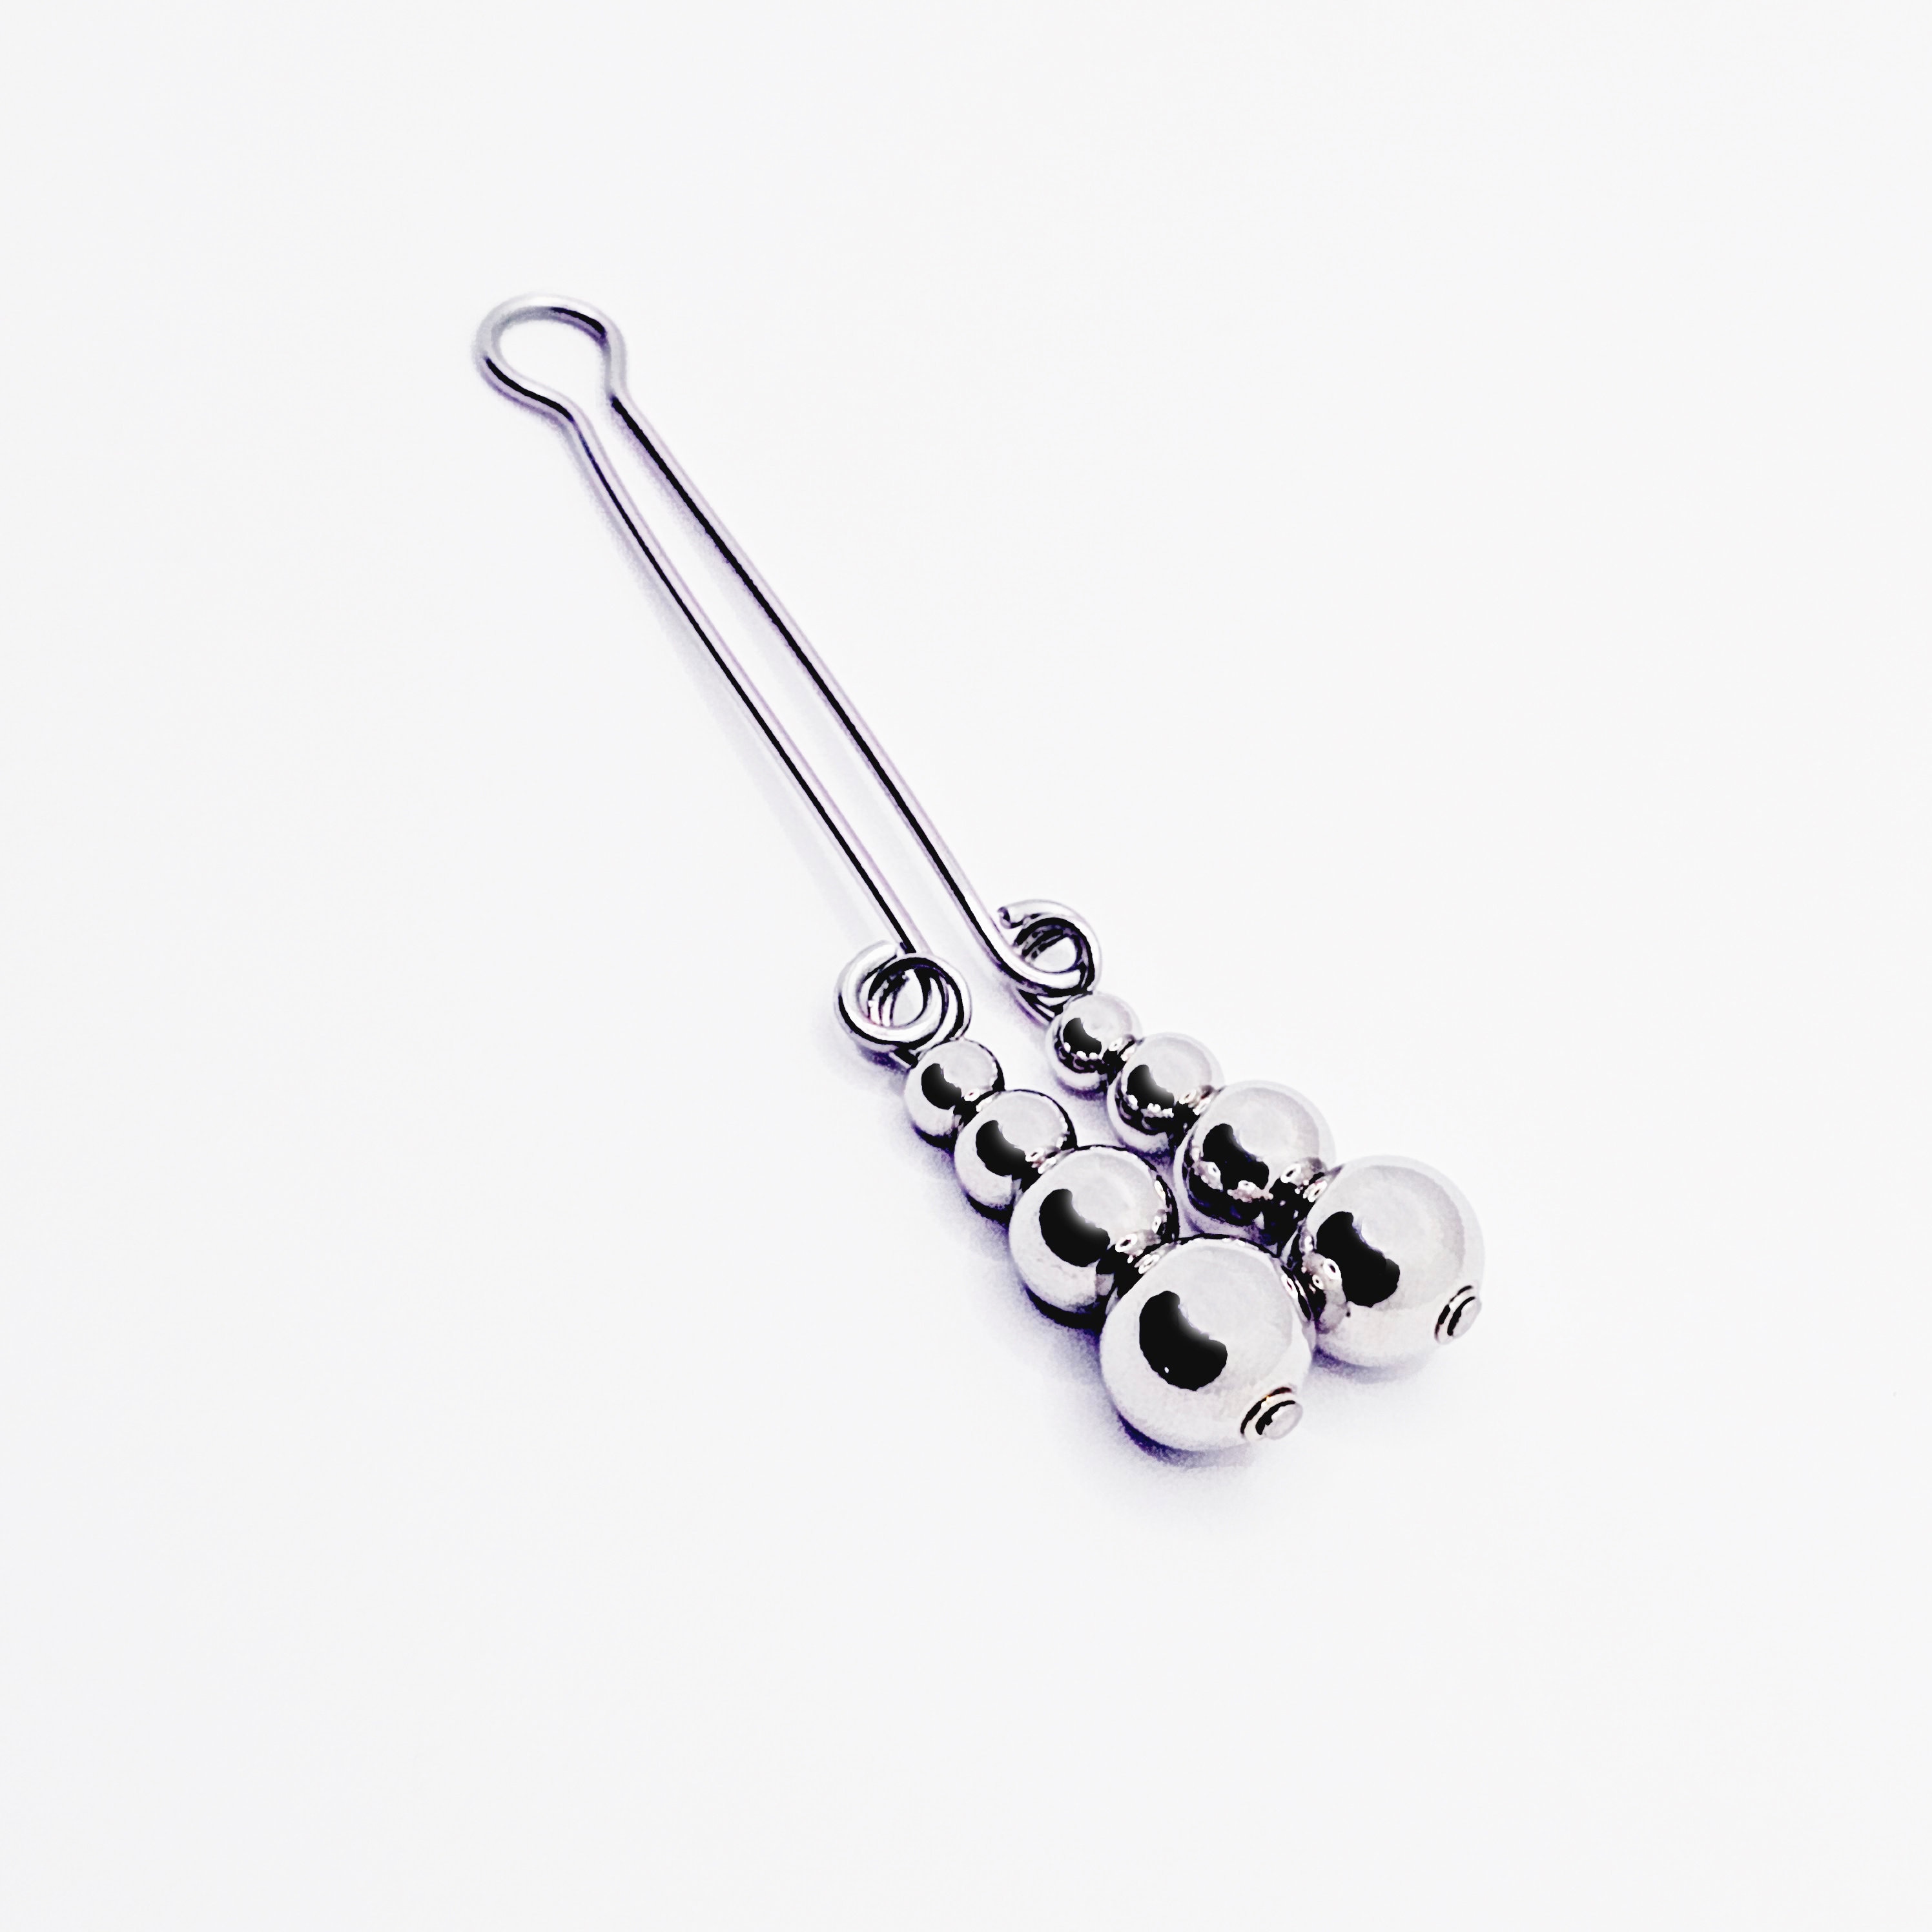 Stainless Steel Clit Clamp / Labia Clip with Lightly Weighted Beads. Mature Listing, BDSM Gear for Submissive photo